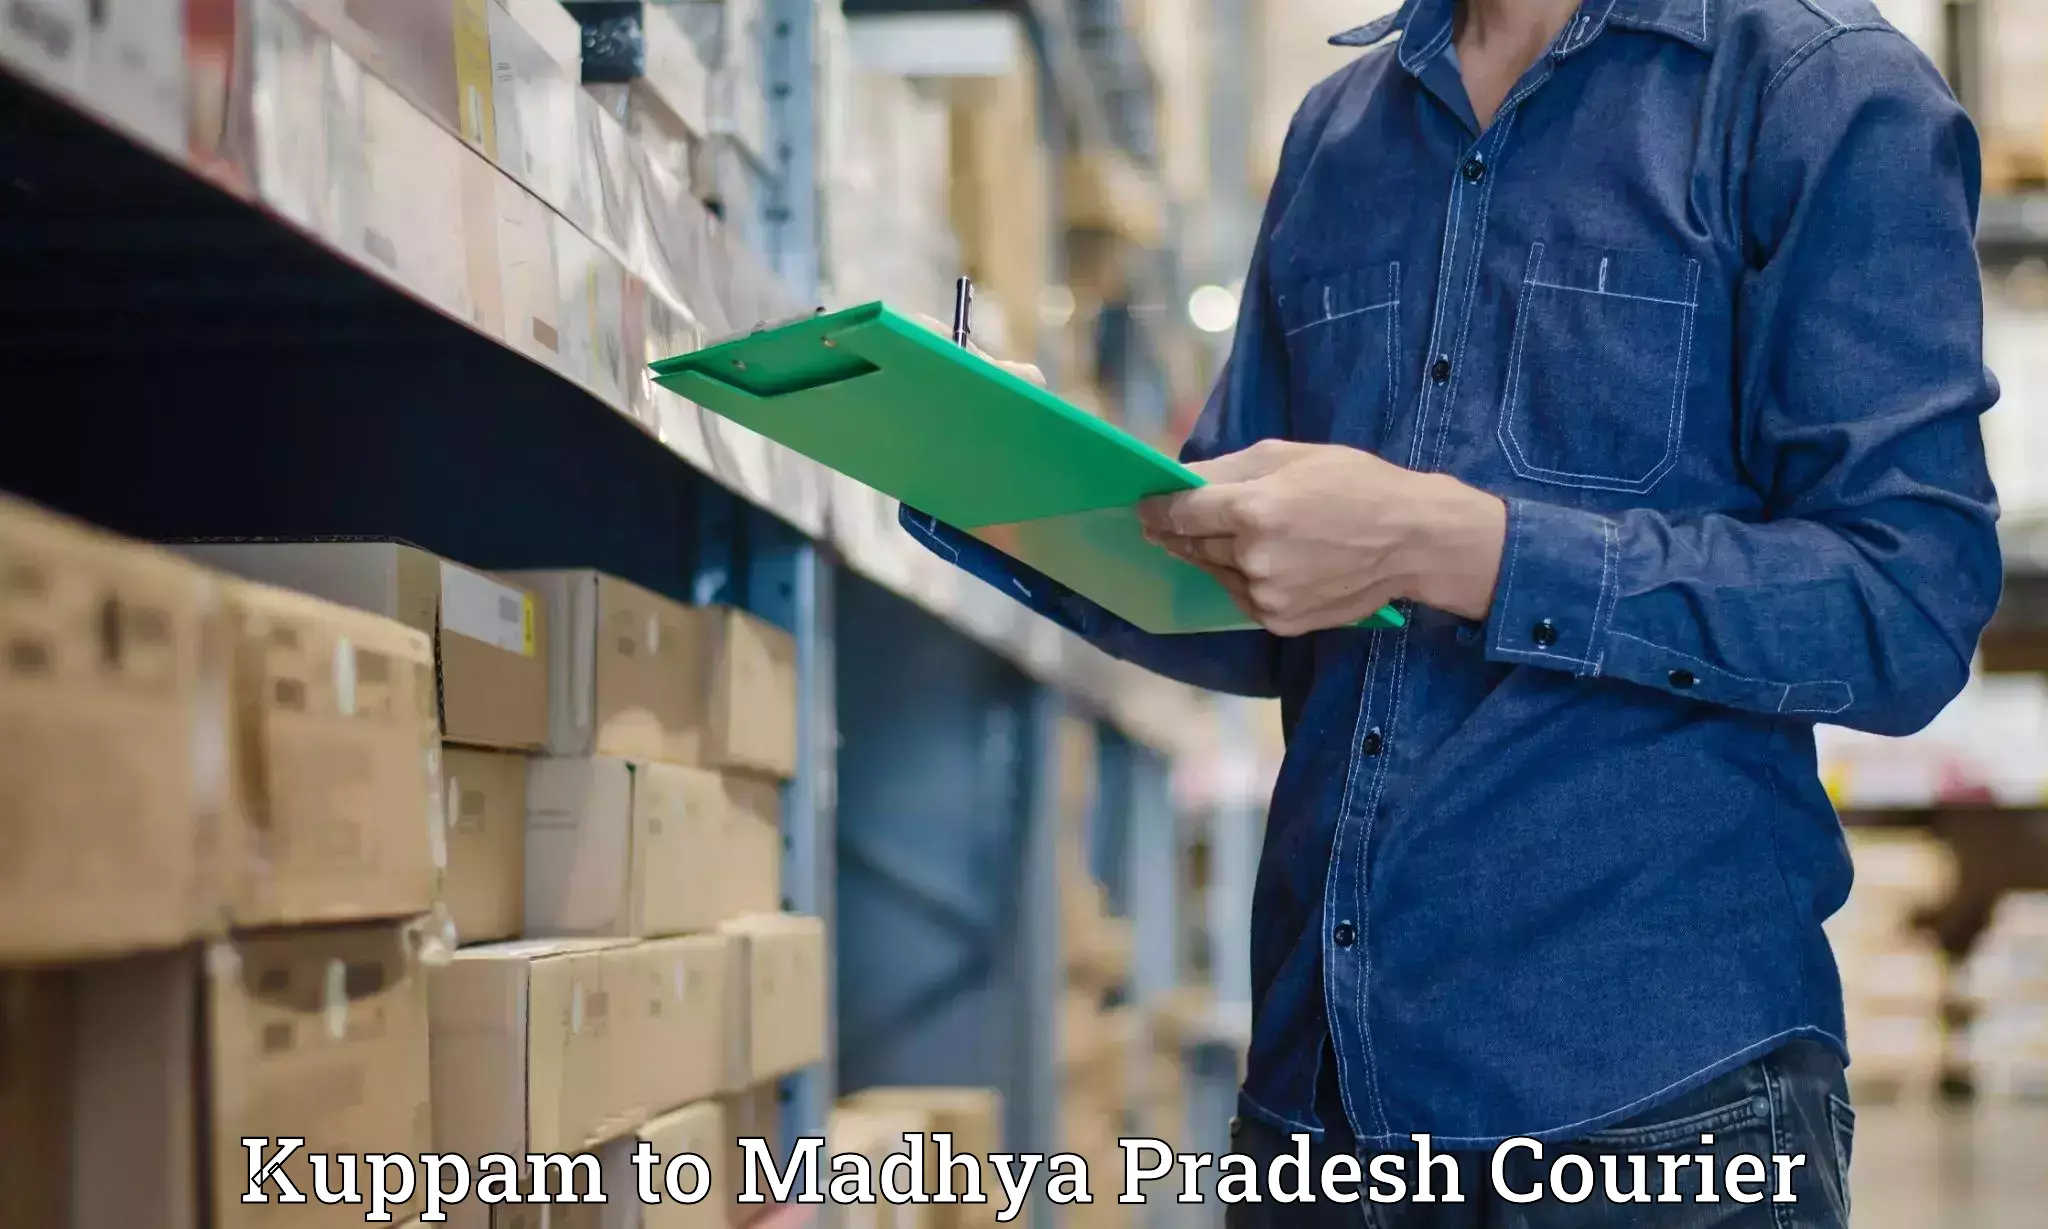 Full-service courier options Kuppam to Niwari